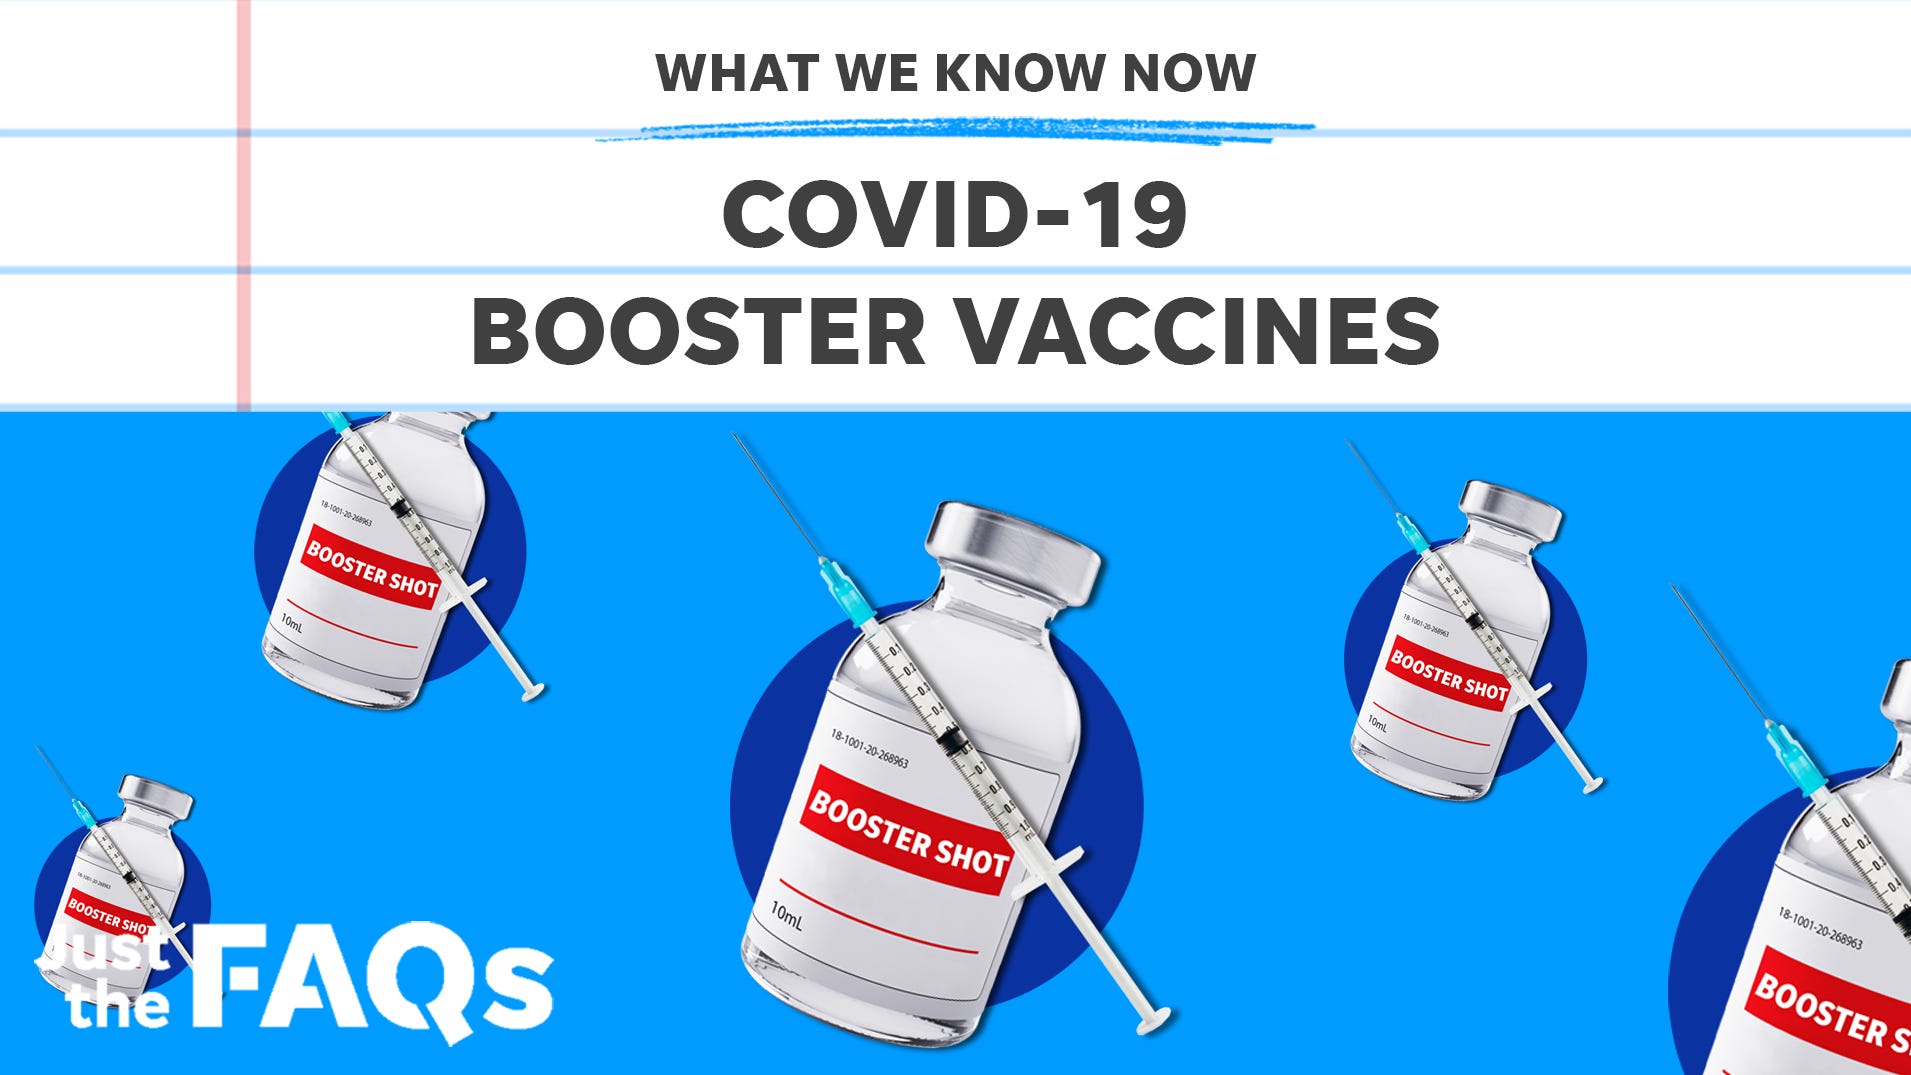 Why we may need a booster for COVID19 vaccines